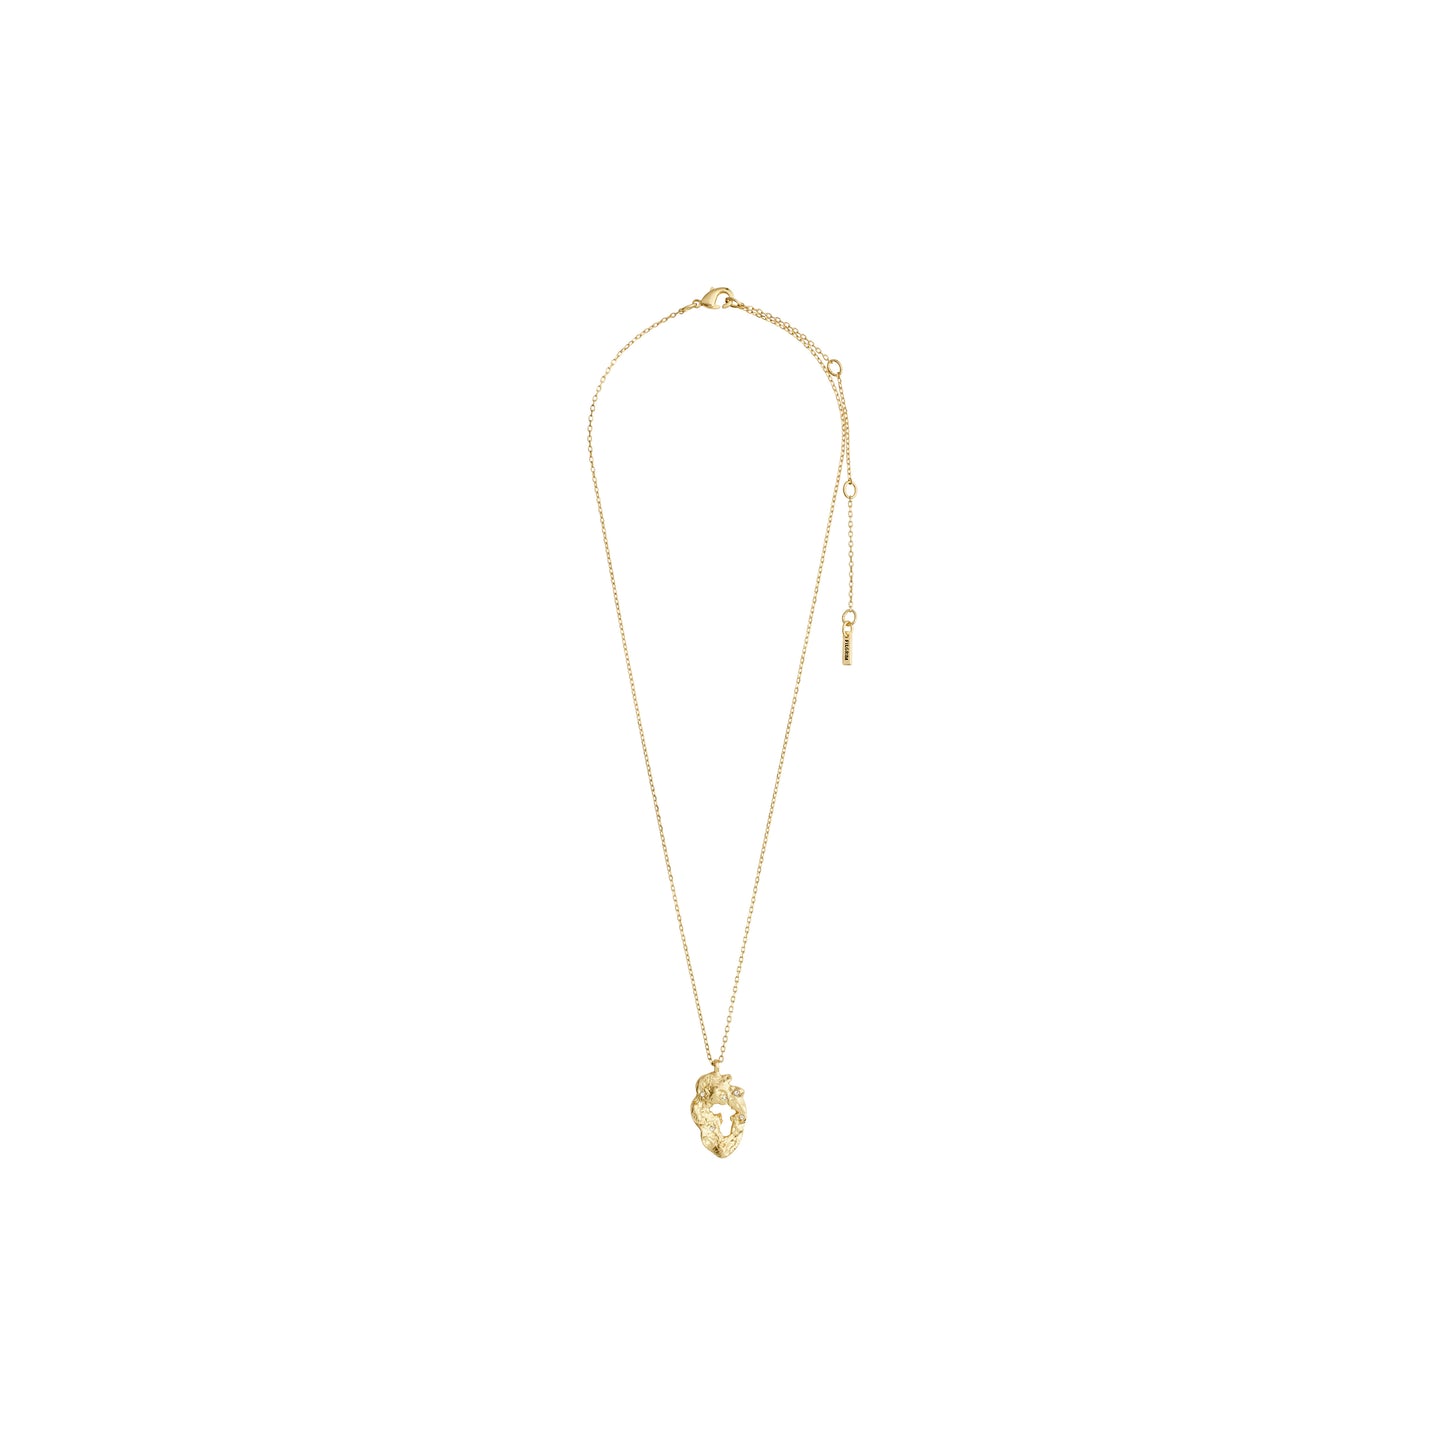 QUINN recycled organic shaped pendant necklace gold-plated